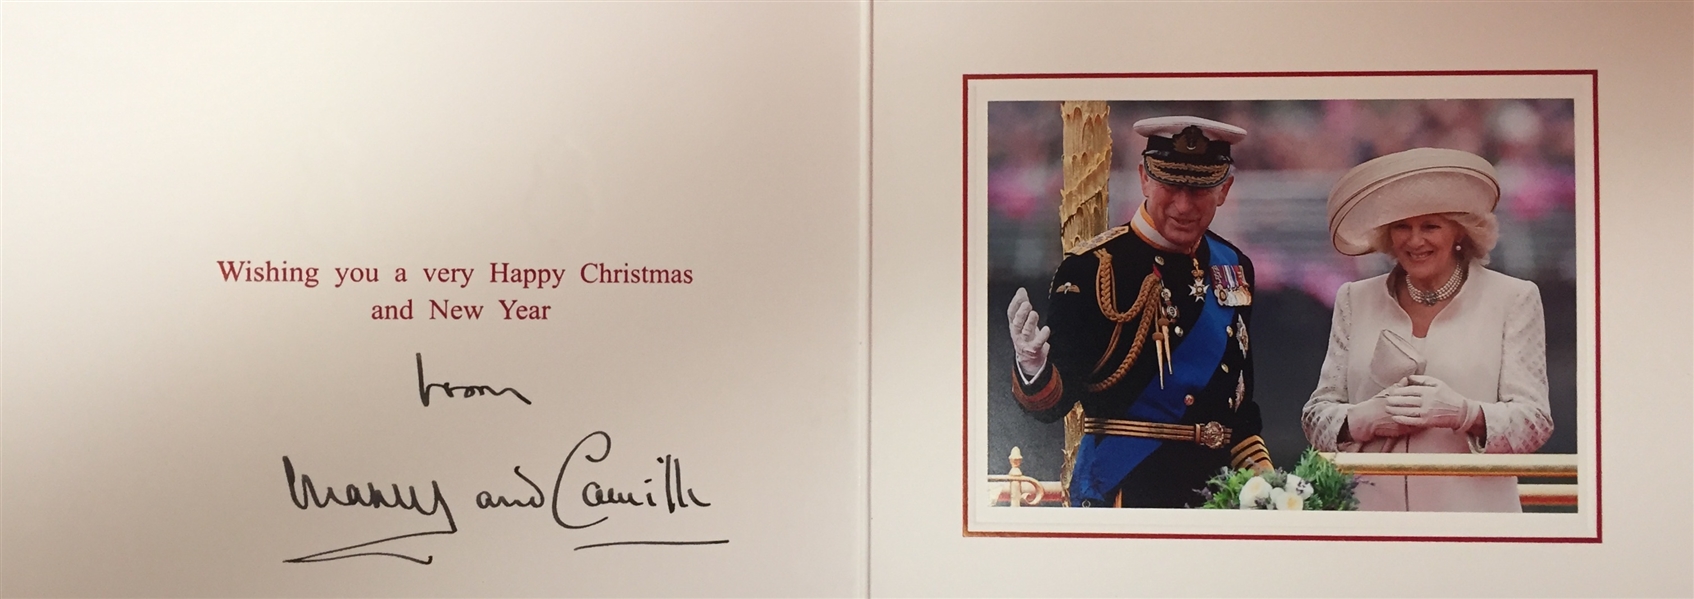 Charles and Camila Signed Christmas Card to Aileen Mehle (Suzy Knickerbocker)